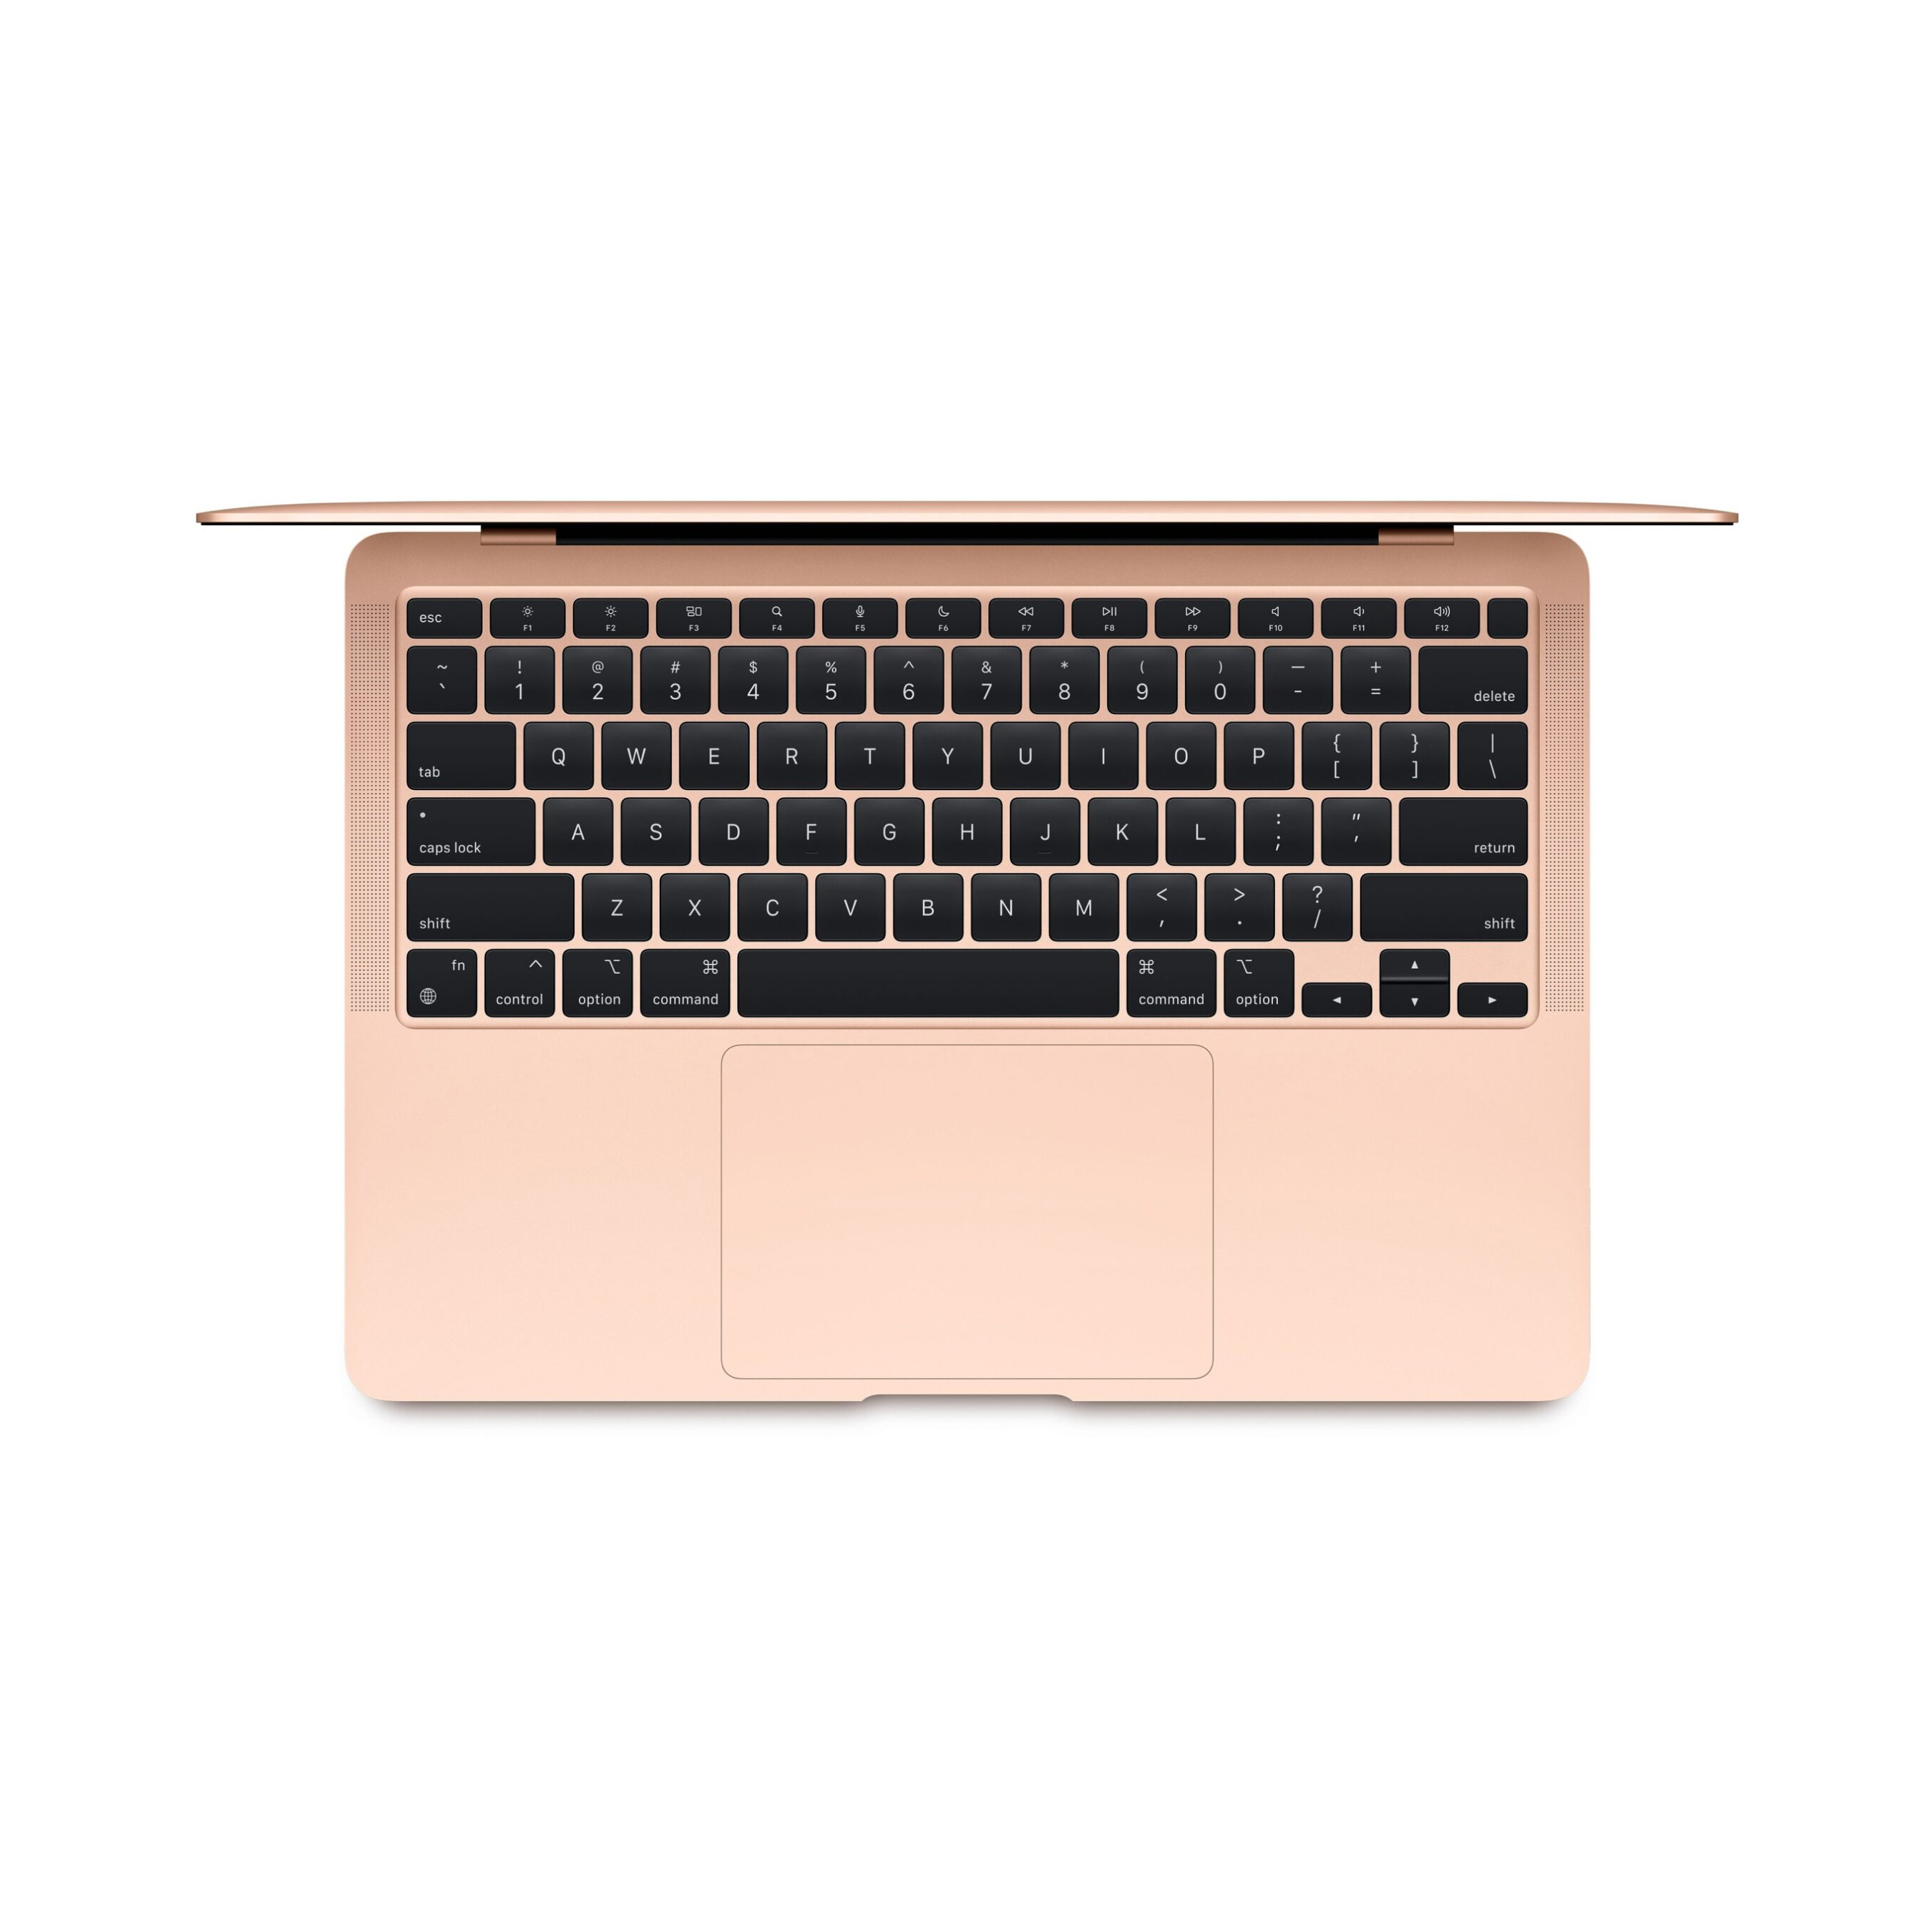 Macbook Air MGND3 2020 With Apple M1 Chip (13", Chip M1, 8GB/256GB) Gold RESMI INDO